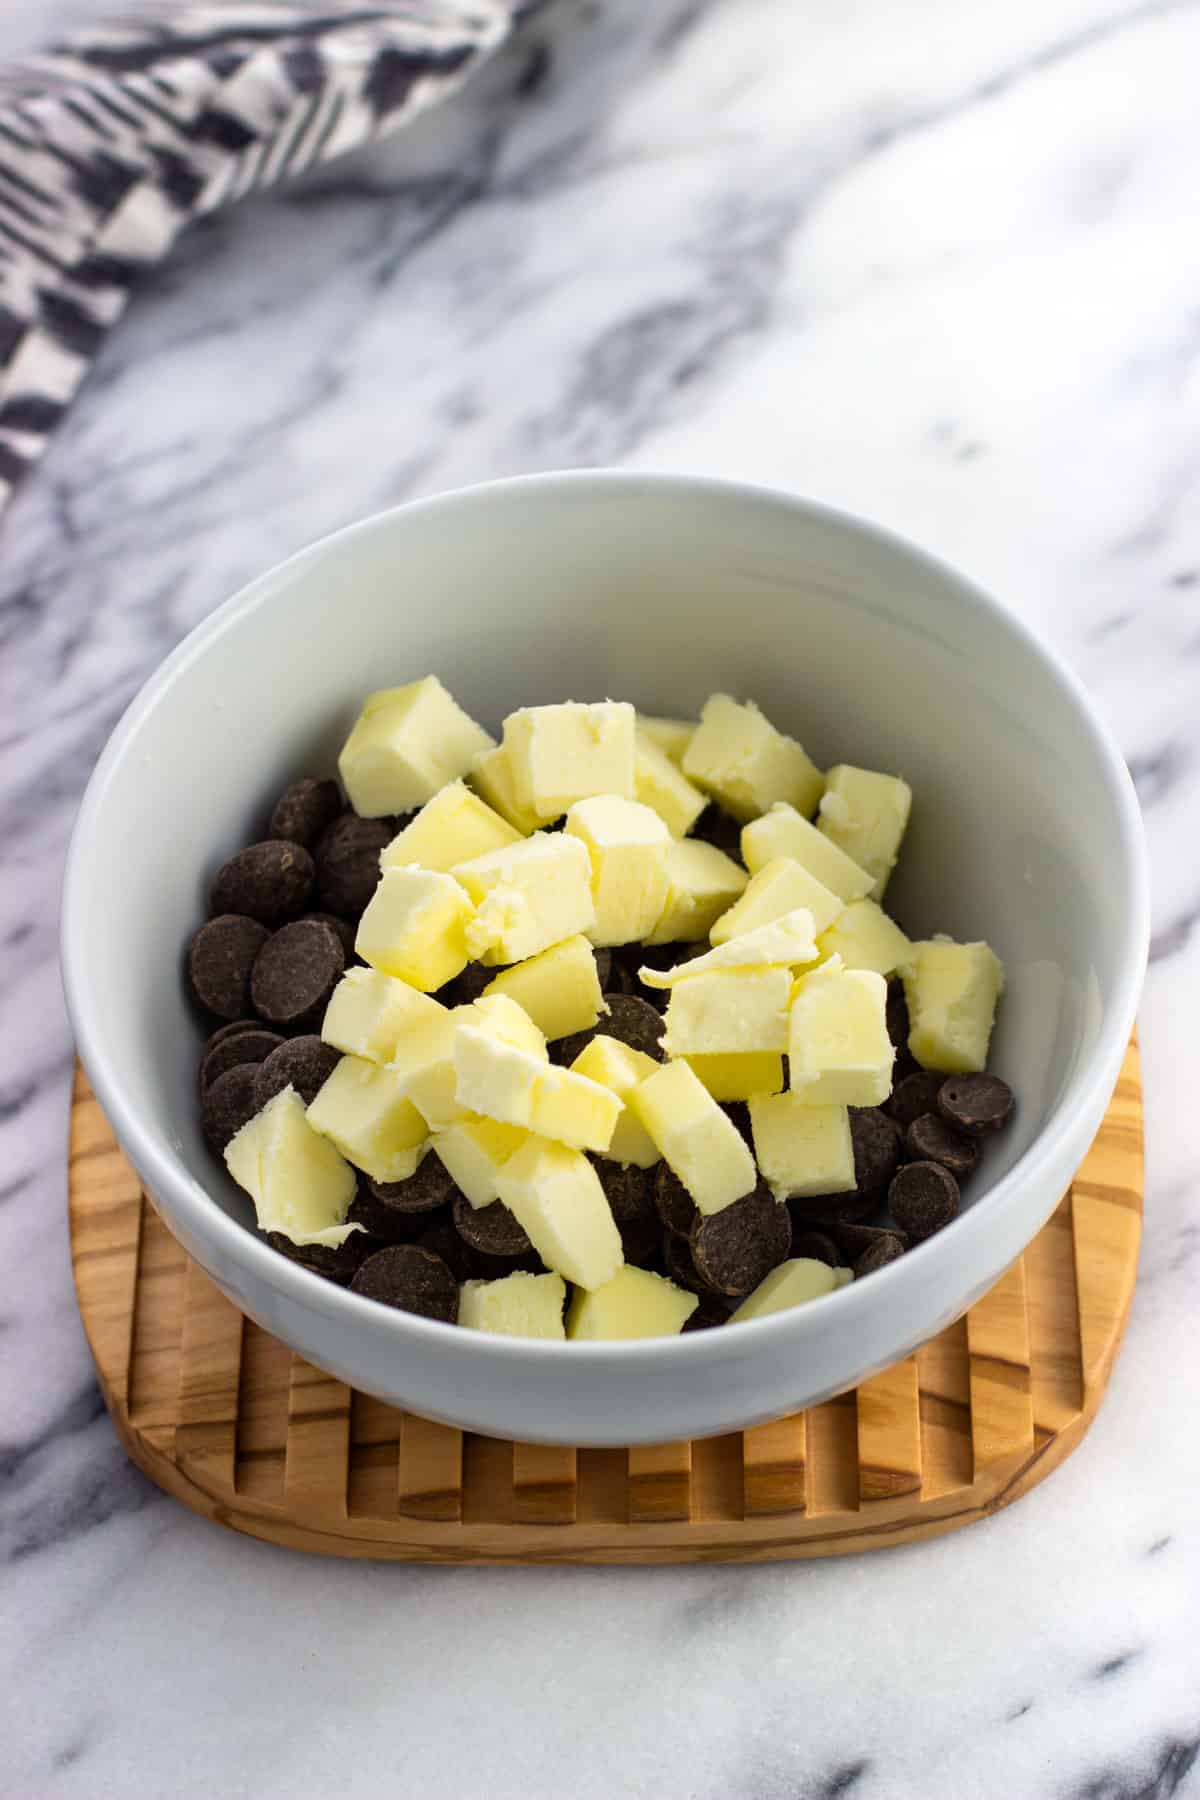 Cubed butter and chocolate chips in a bowl.